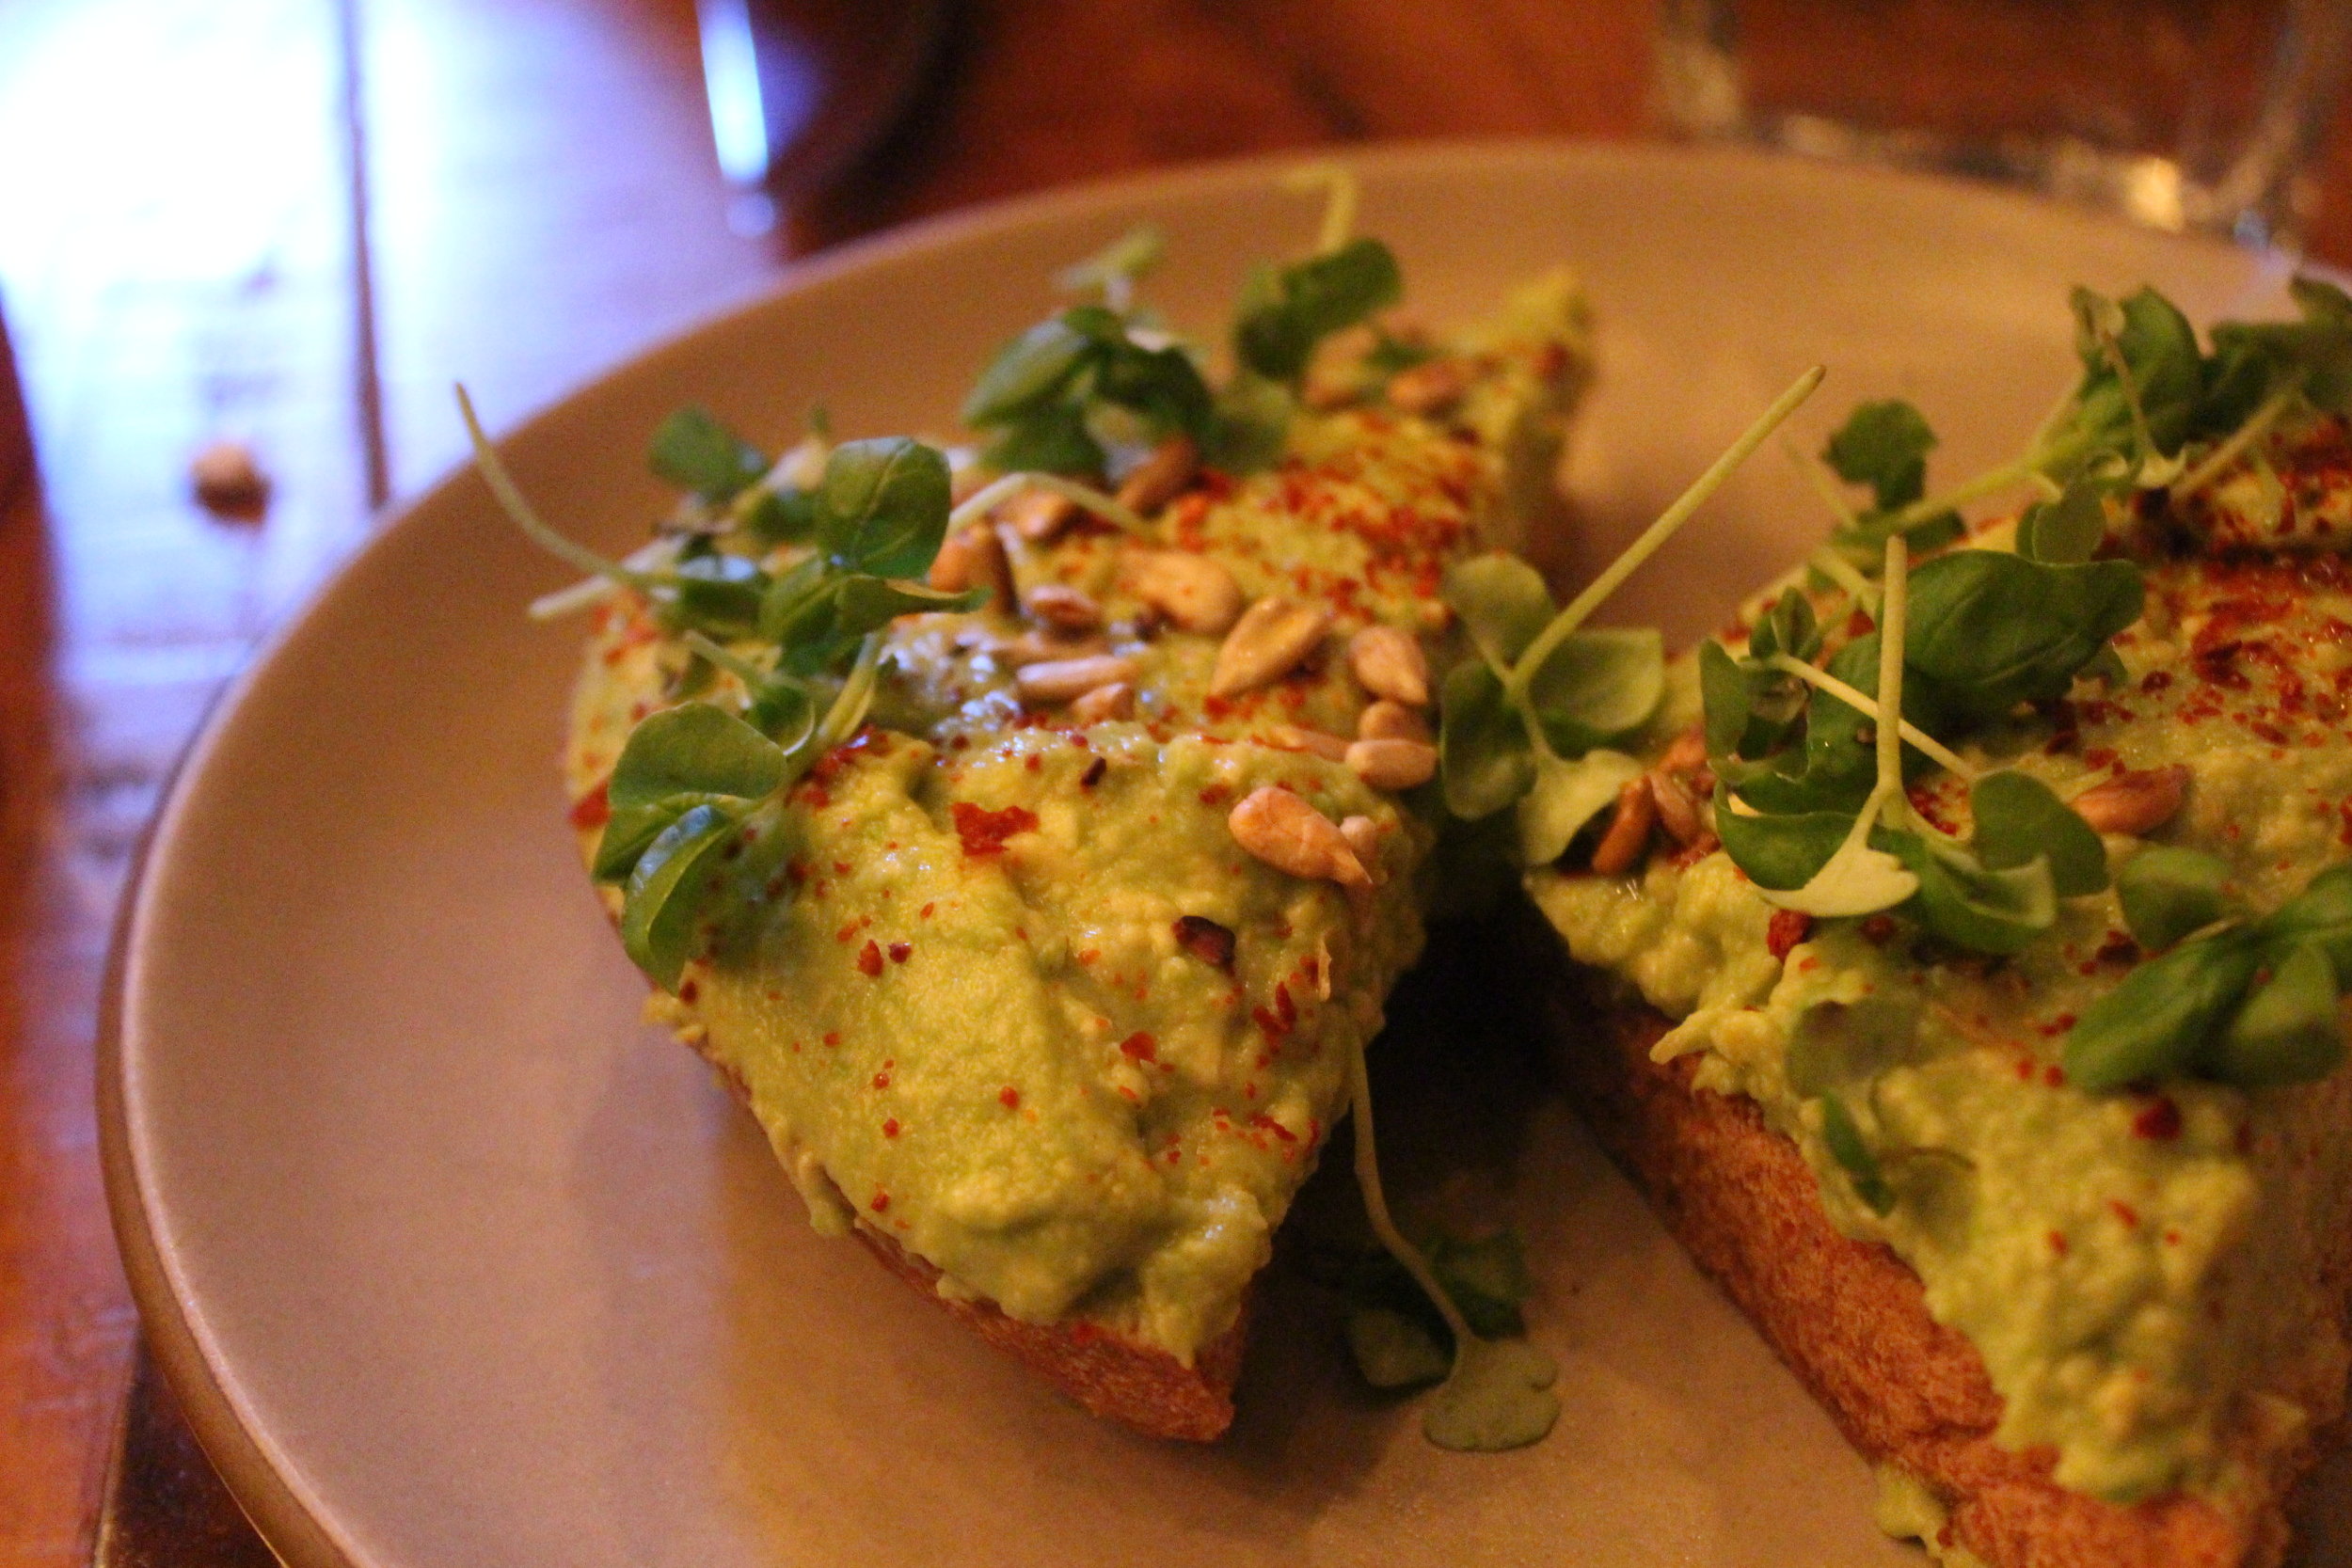 Avocado Toast (Homemade Wheat Bread, Aleppo Pepper, Lemon, Lebanese Olive Oil, Seeds and Sprouts, Basil)